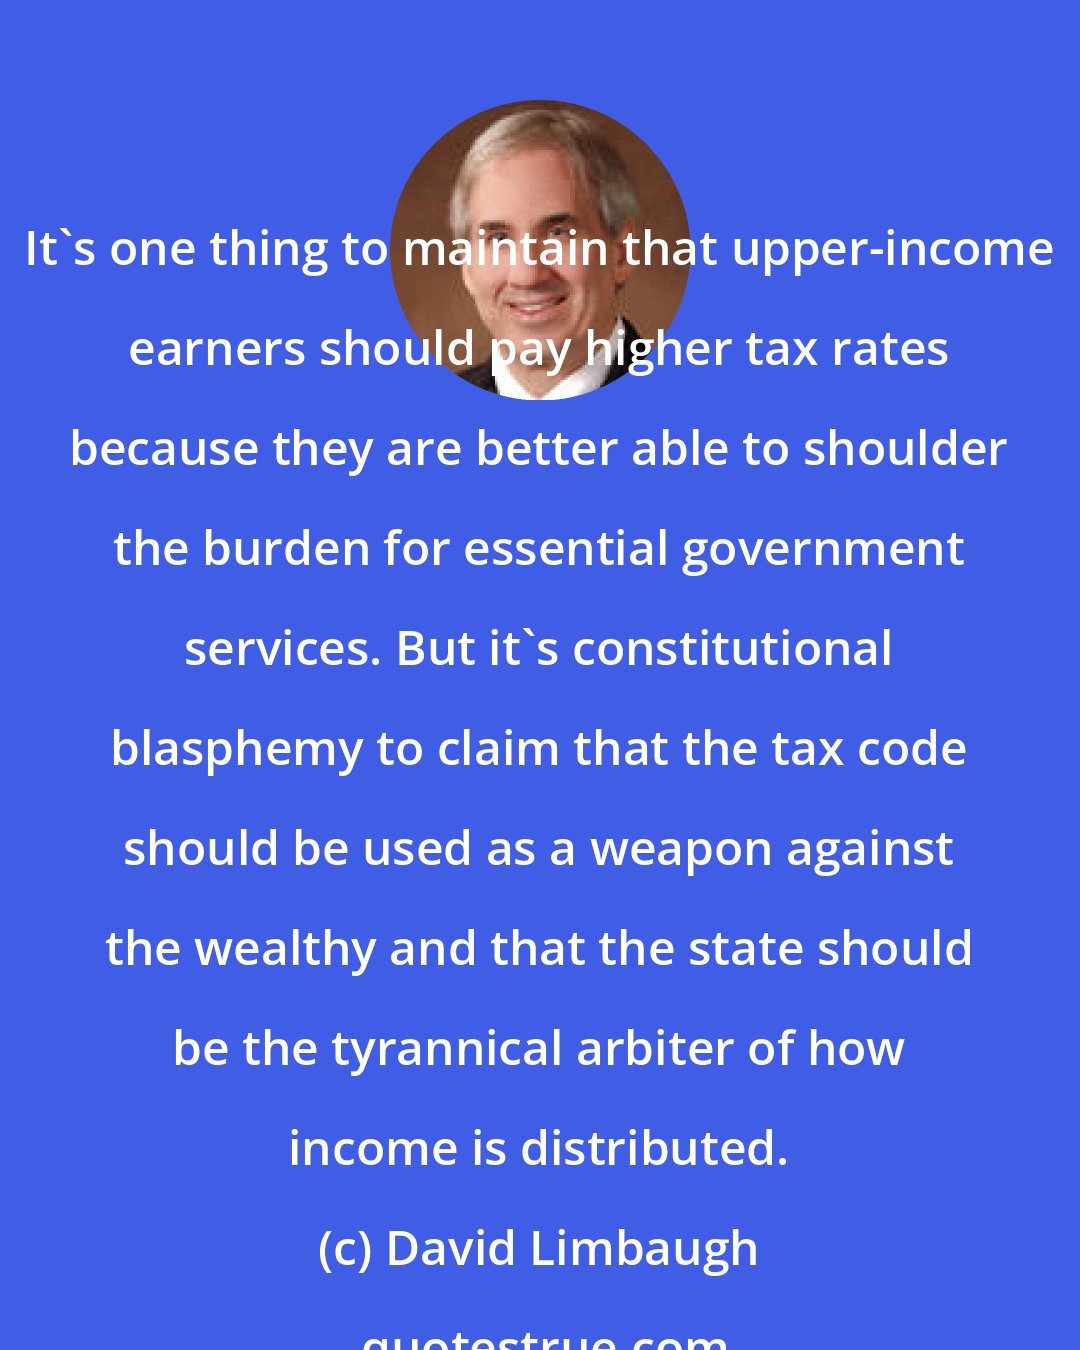 David Limbaugh: It's one thing to maintain that upper-income earners should pay higher tax rates because they are better able to shoulder the burden for essential government services. But it's constitutional blasphemy to claim that the tax code should be used as a weapon against the wealthy and that the state should be the tyrannical arbiter of how income is distributed.